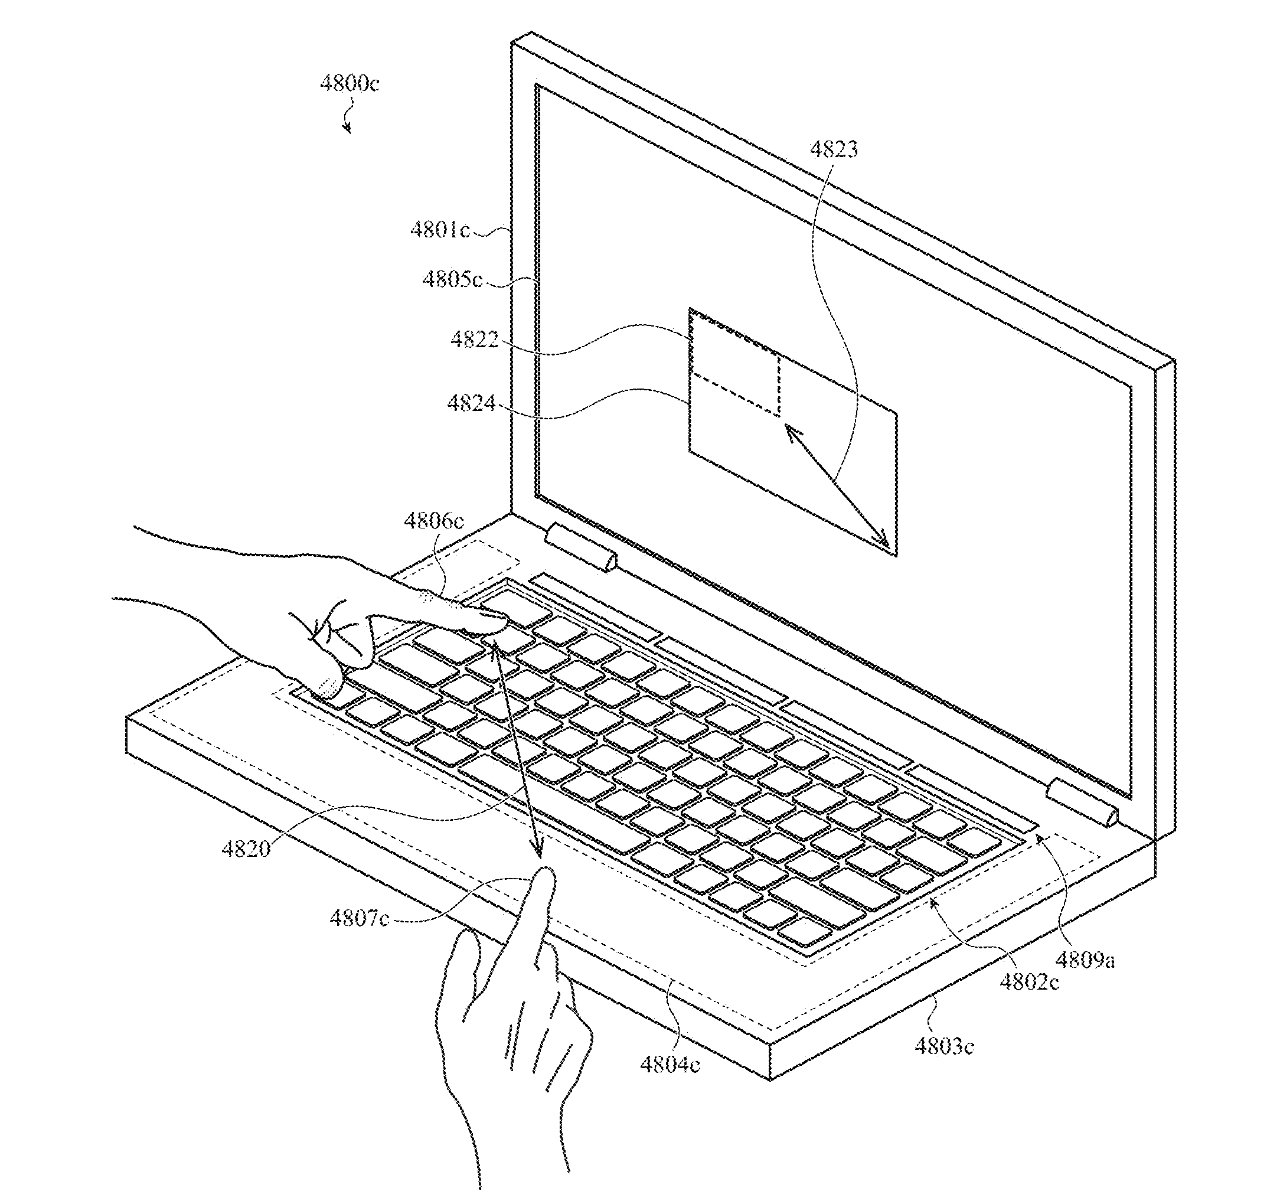 Details from the patent show how, even with a keyboard view, you can draw lines on the screen